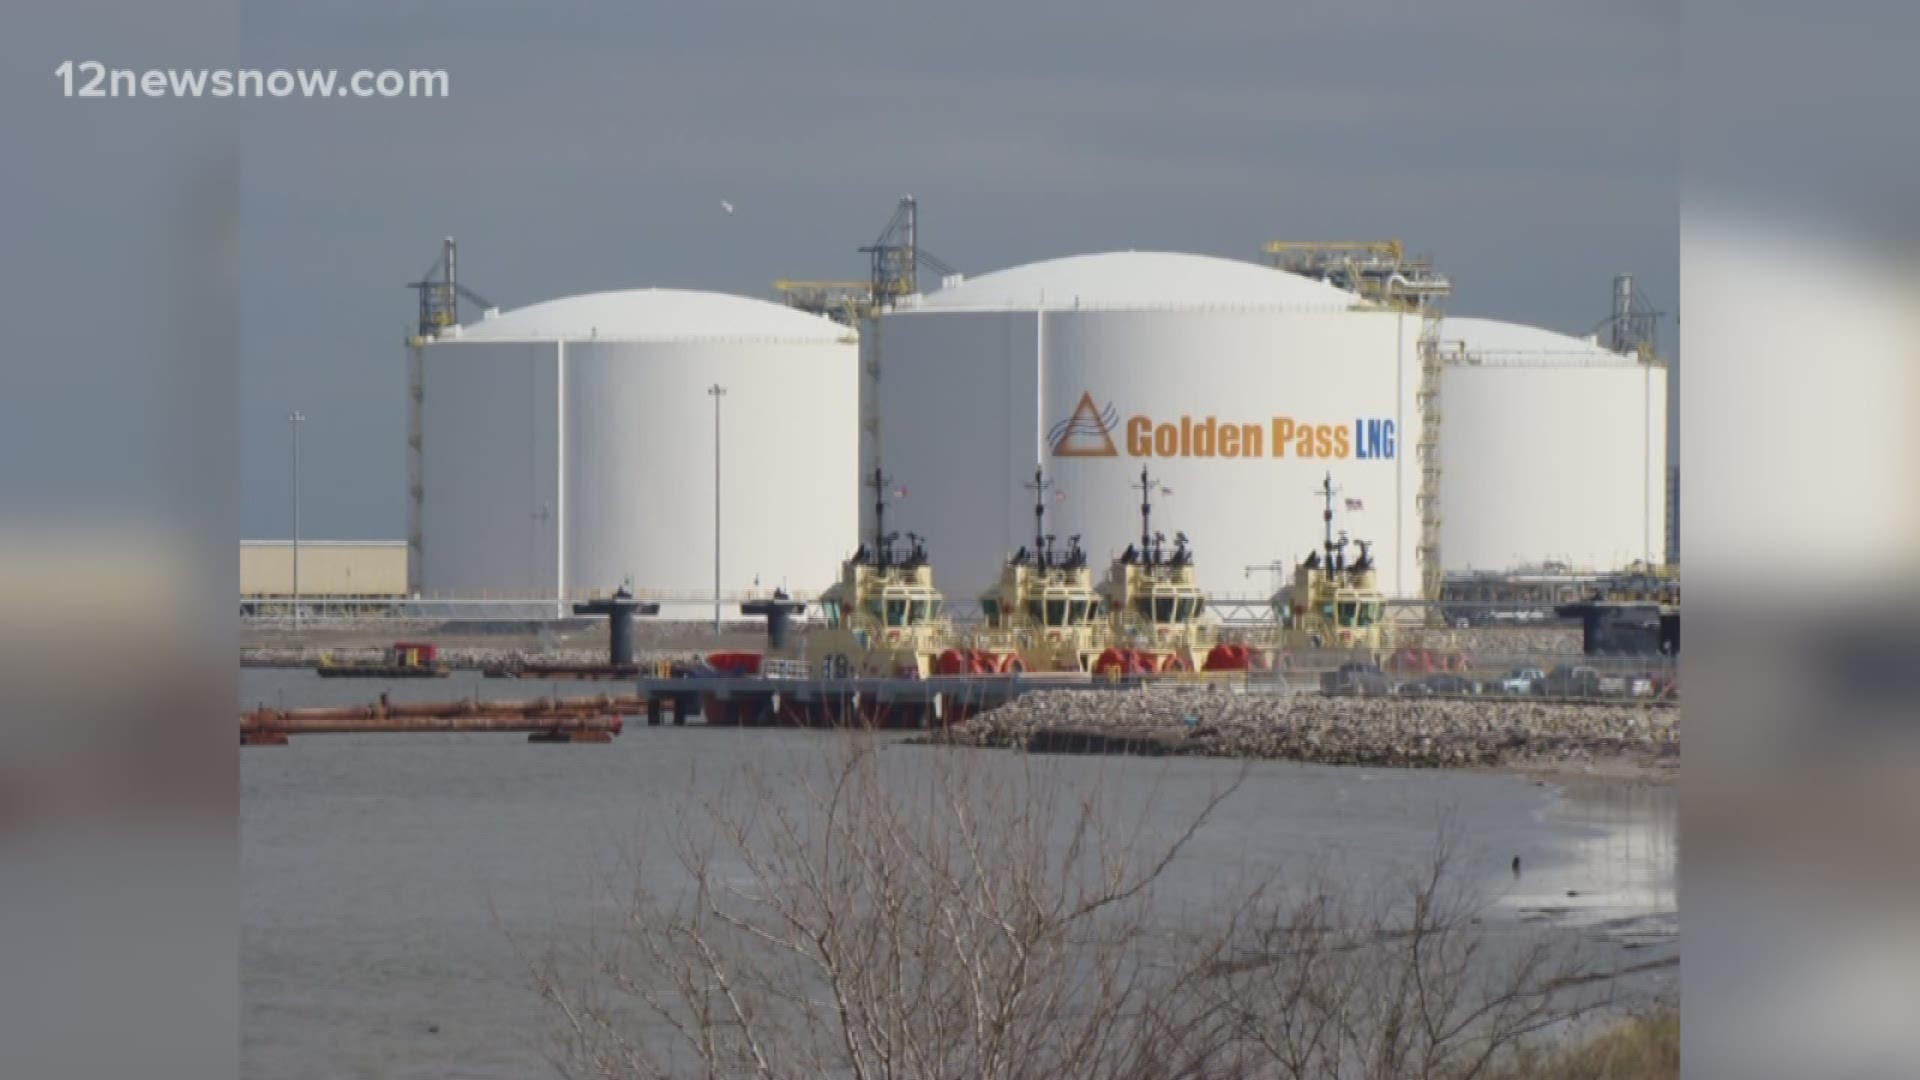 They will export liquefied natural gas from a plant on the Texas Gulf Coast.